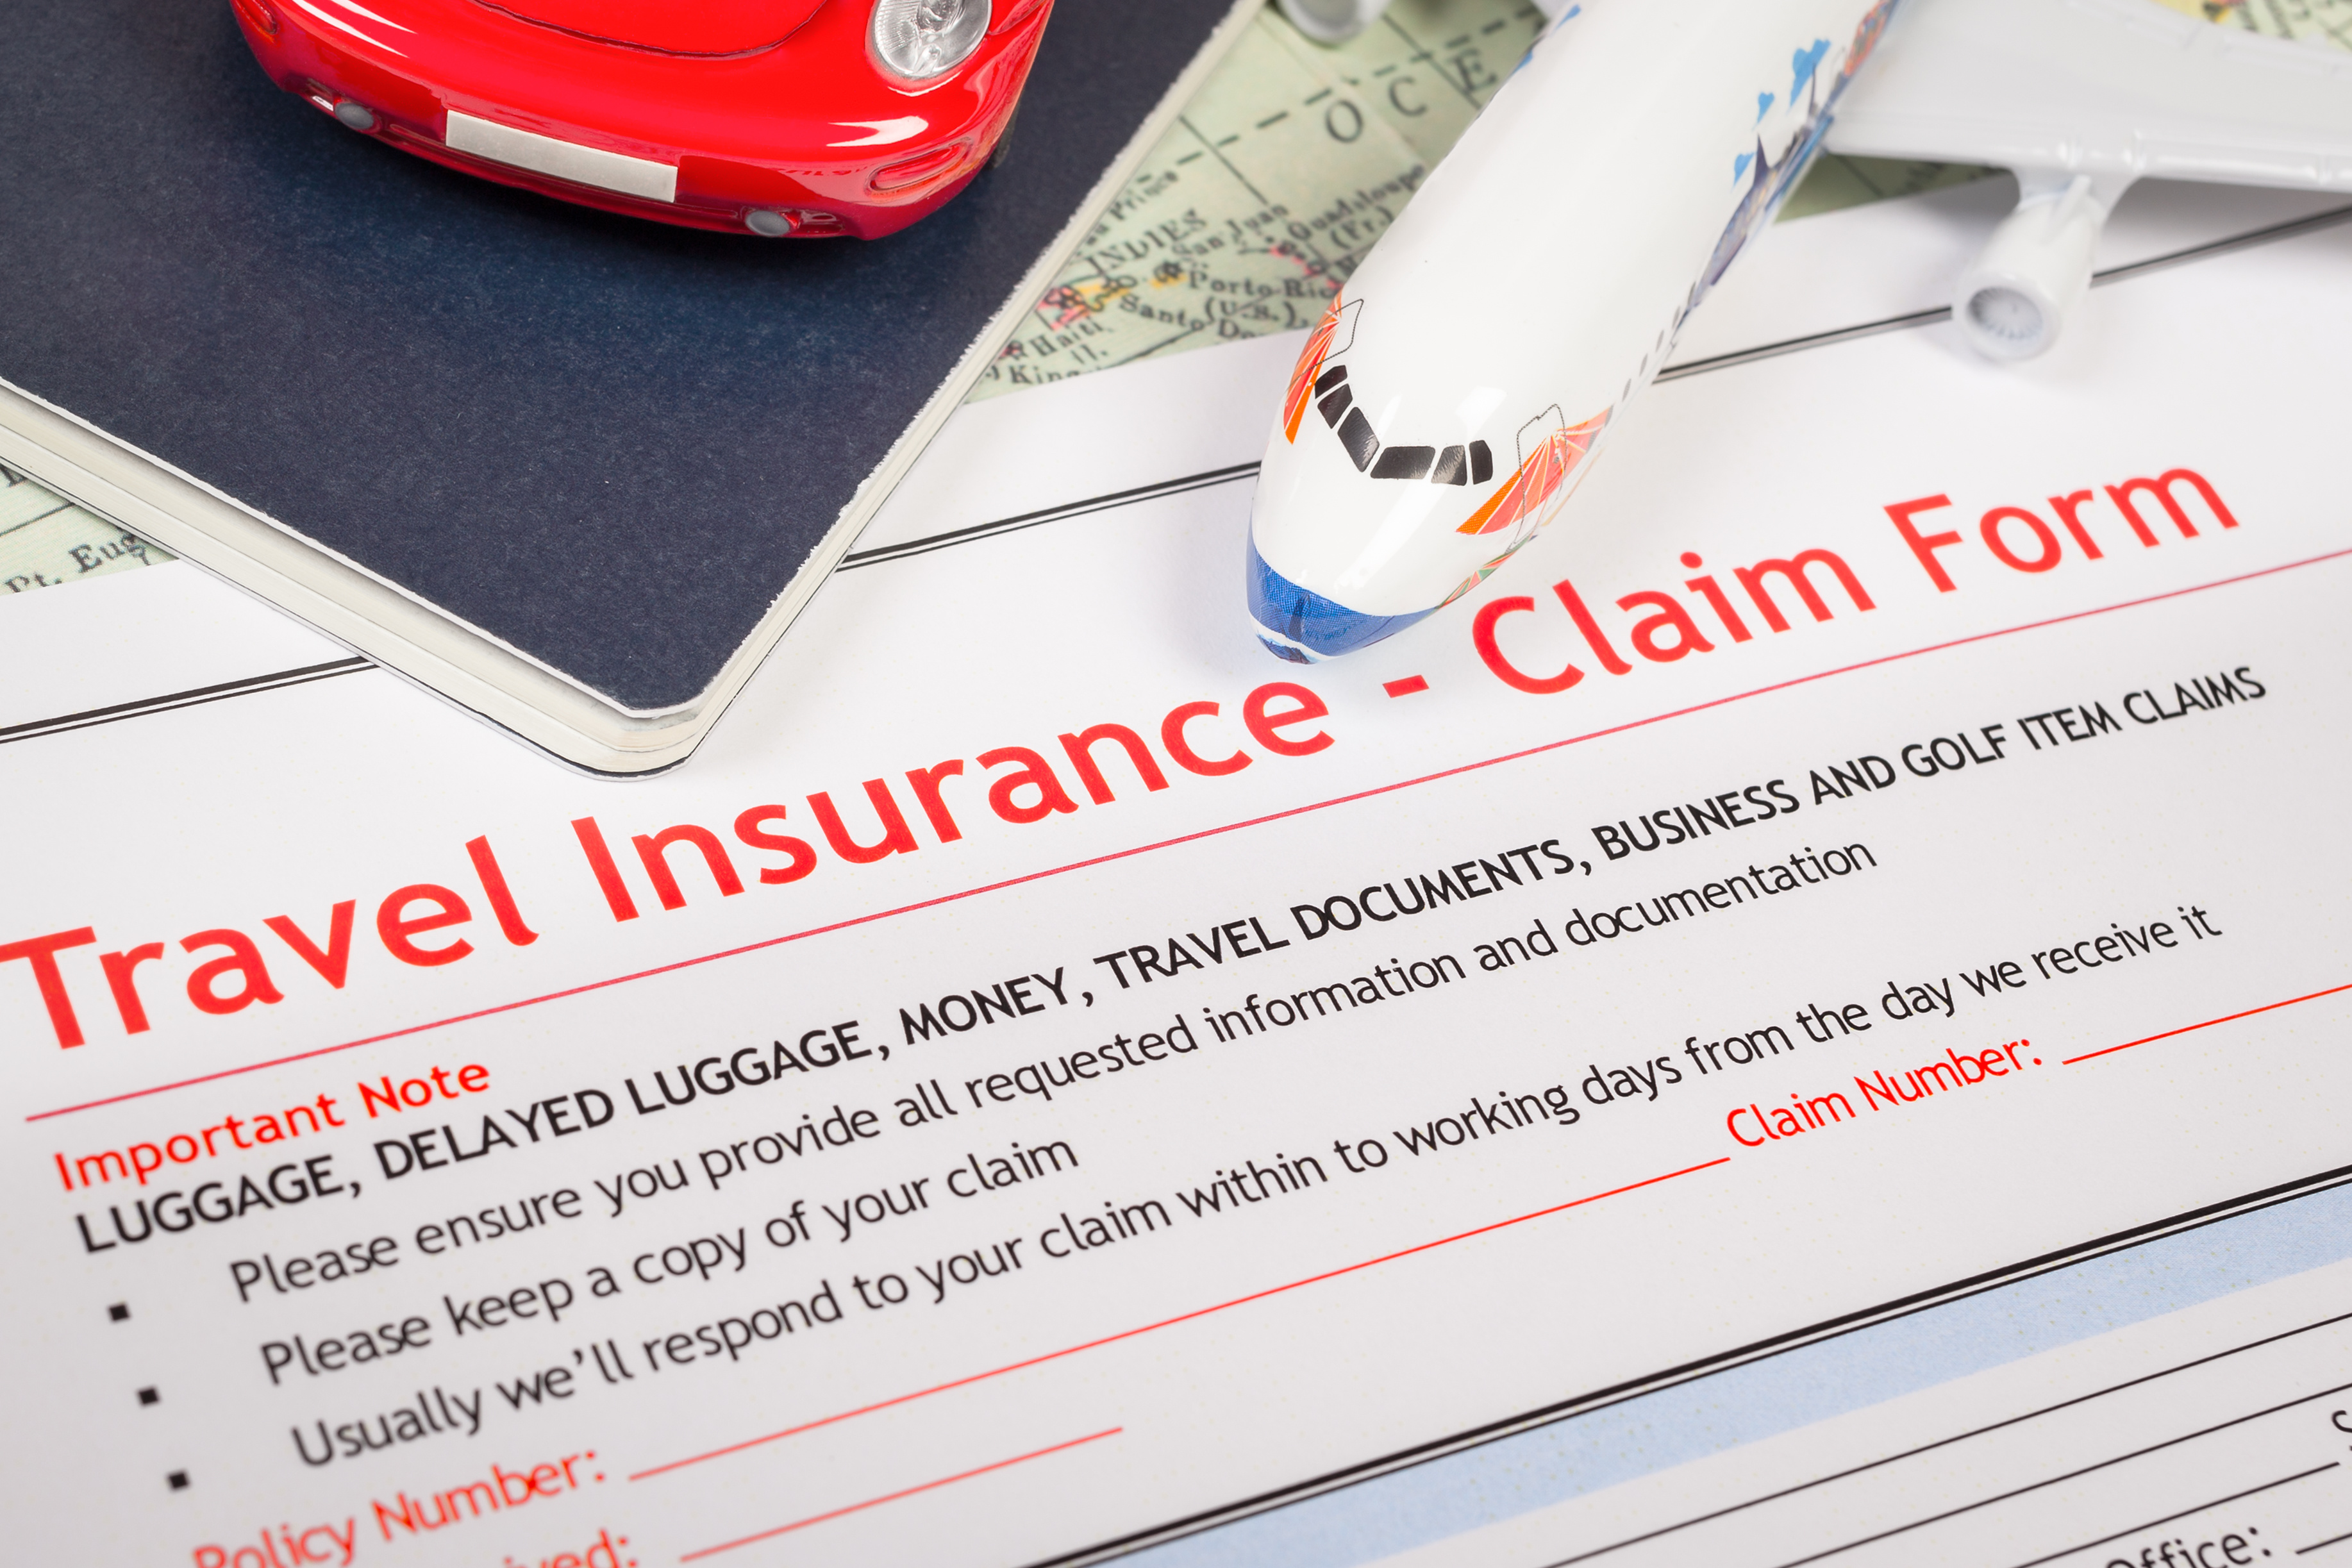 online travel claims